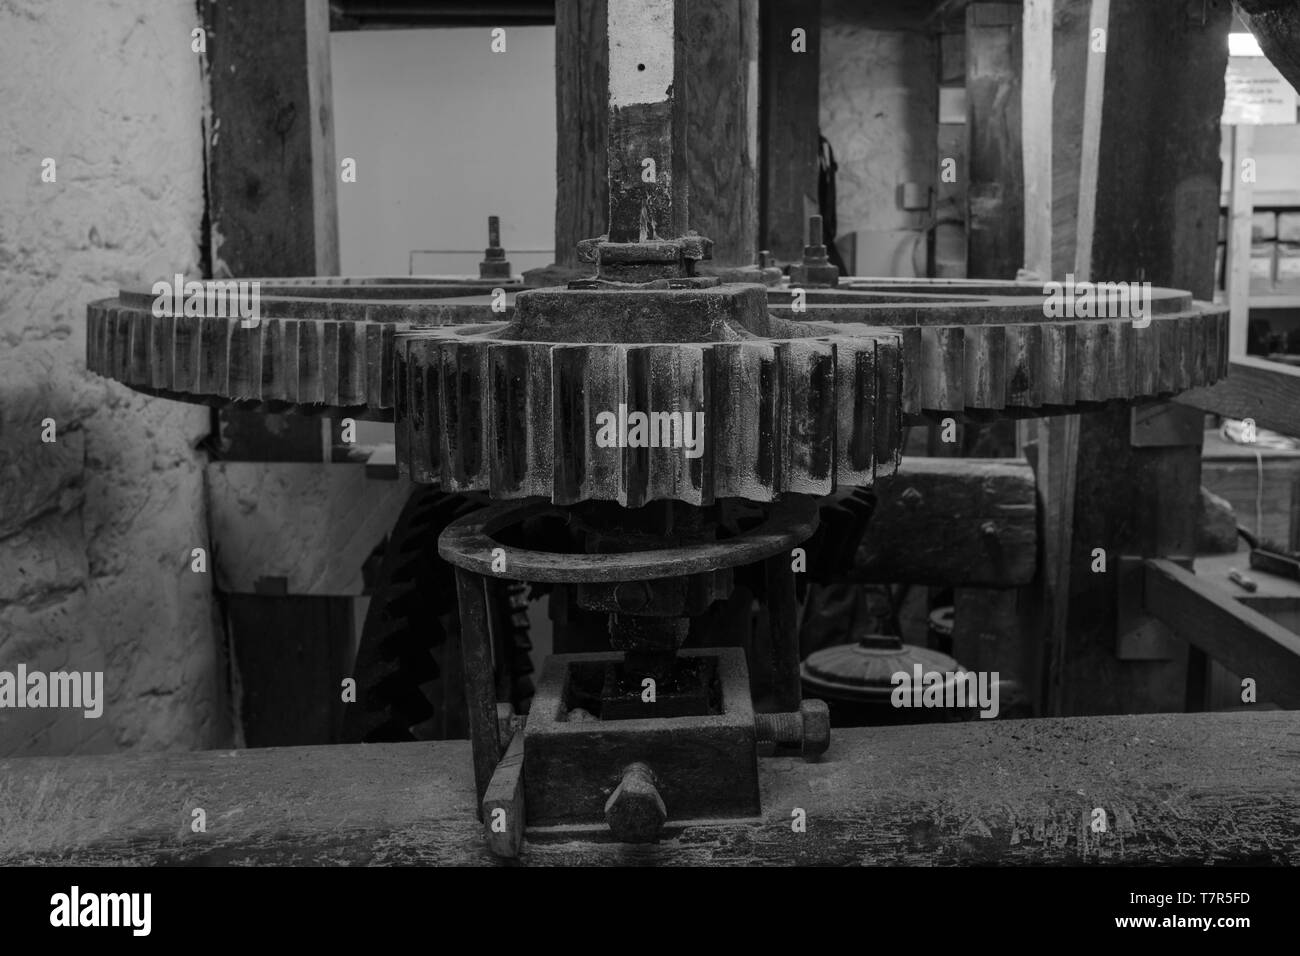 A black and white image of the cogs and machinery inside a watermill in Devon, England, taken from head on of the cogs Stock Photo